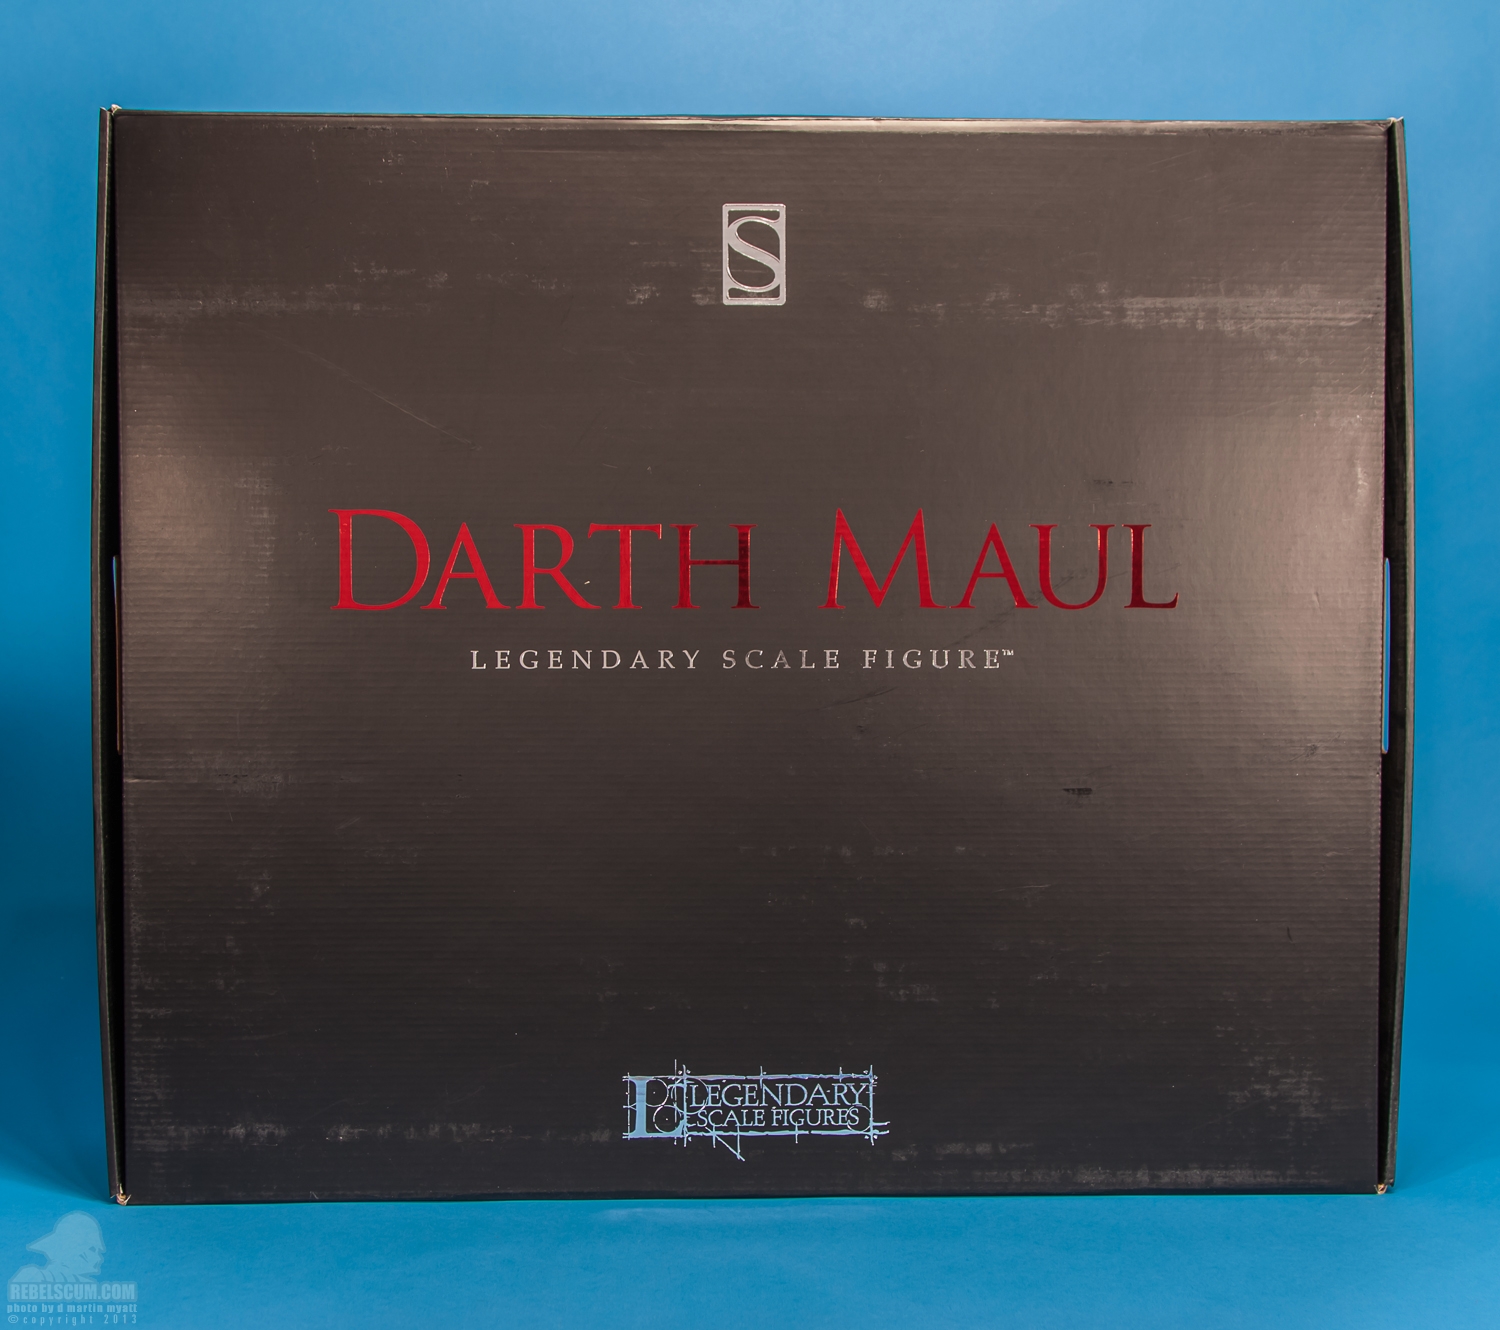 Darth_Maul_Legendary_Scale_Figure_Sideshow_Collectibles-33.jpg